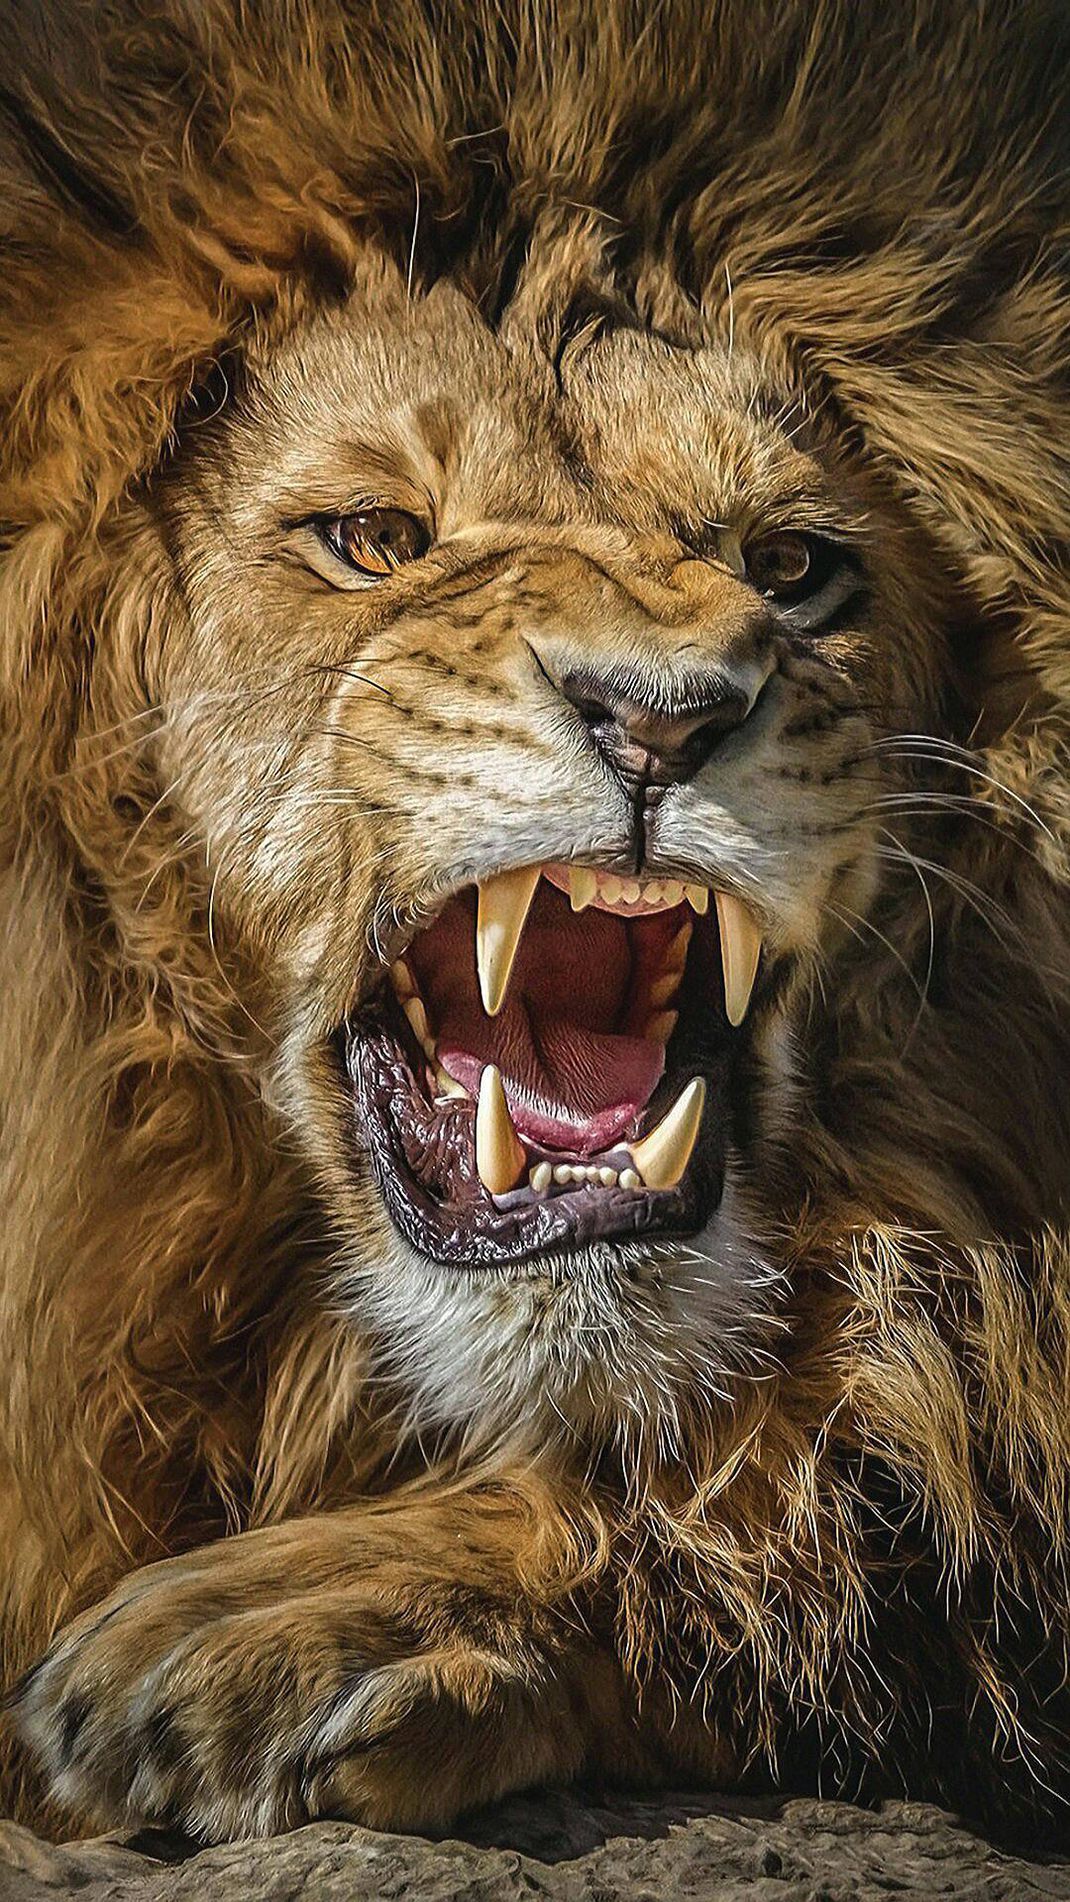 Great Lion Ultra HD Wallpaper For Andriod Download In Link For HD result. Lion photography, Lion image, Lion picture